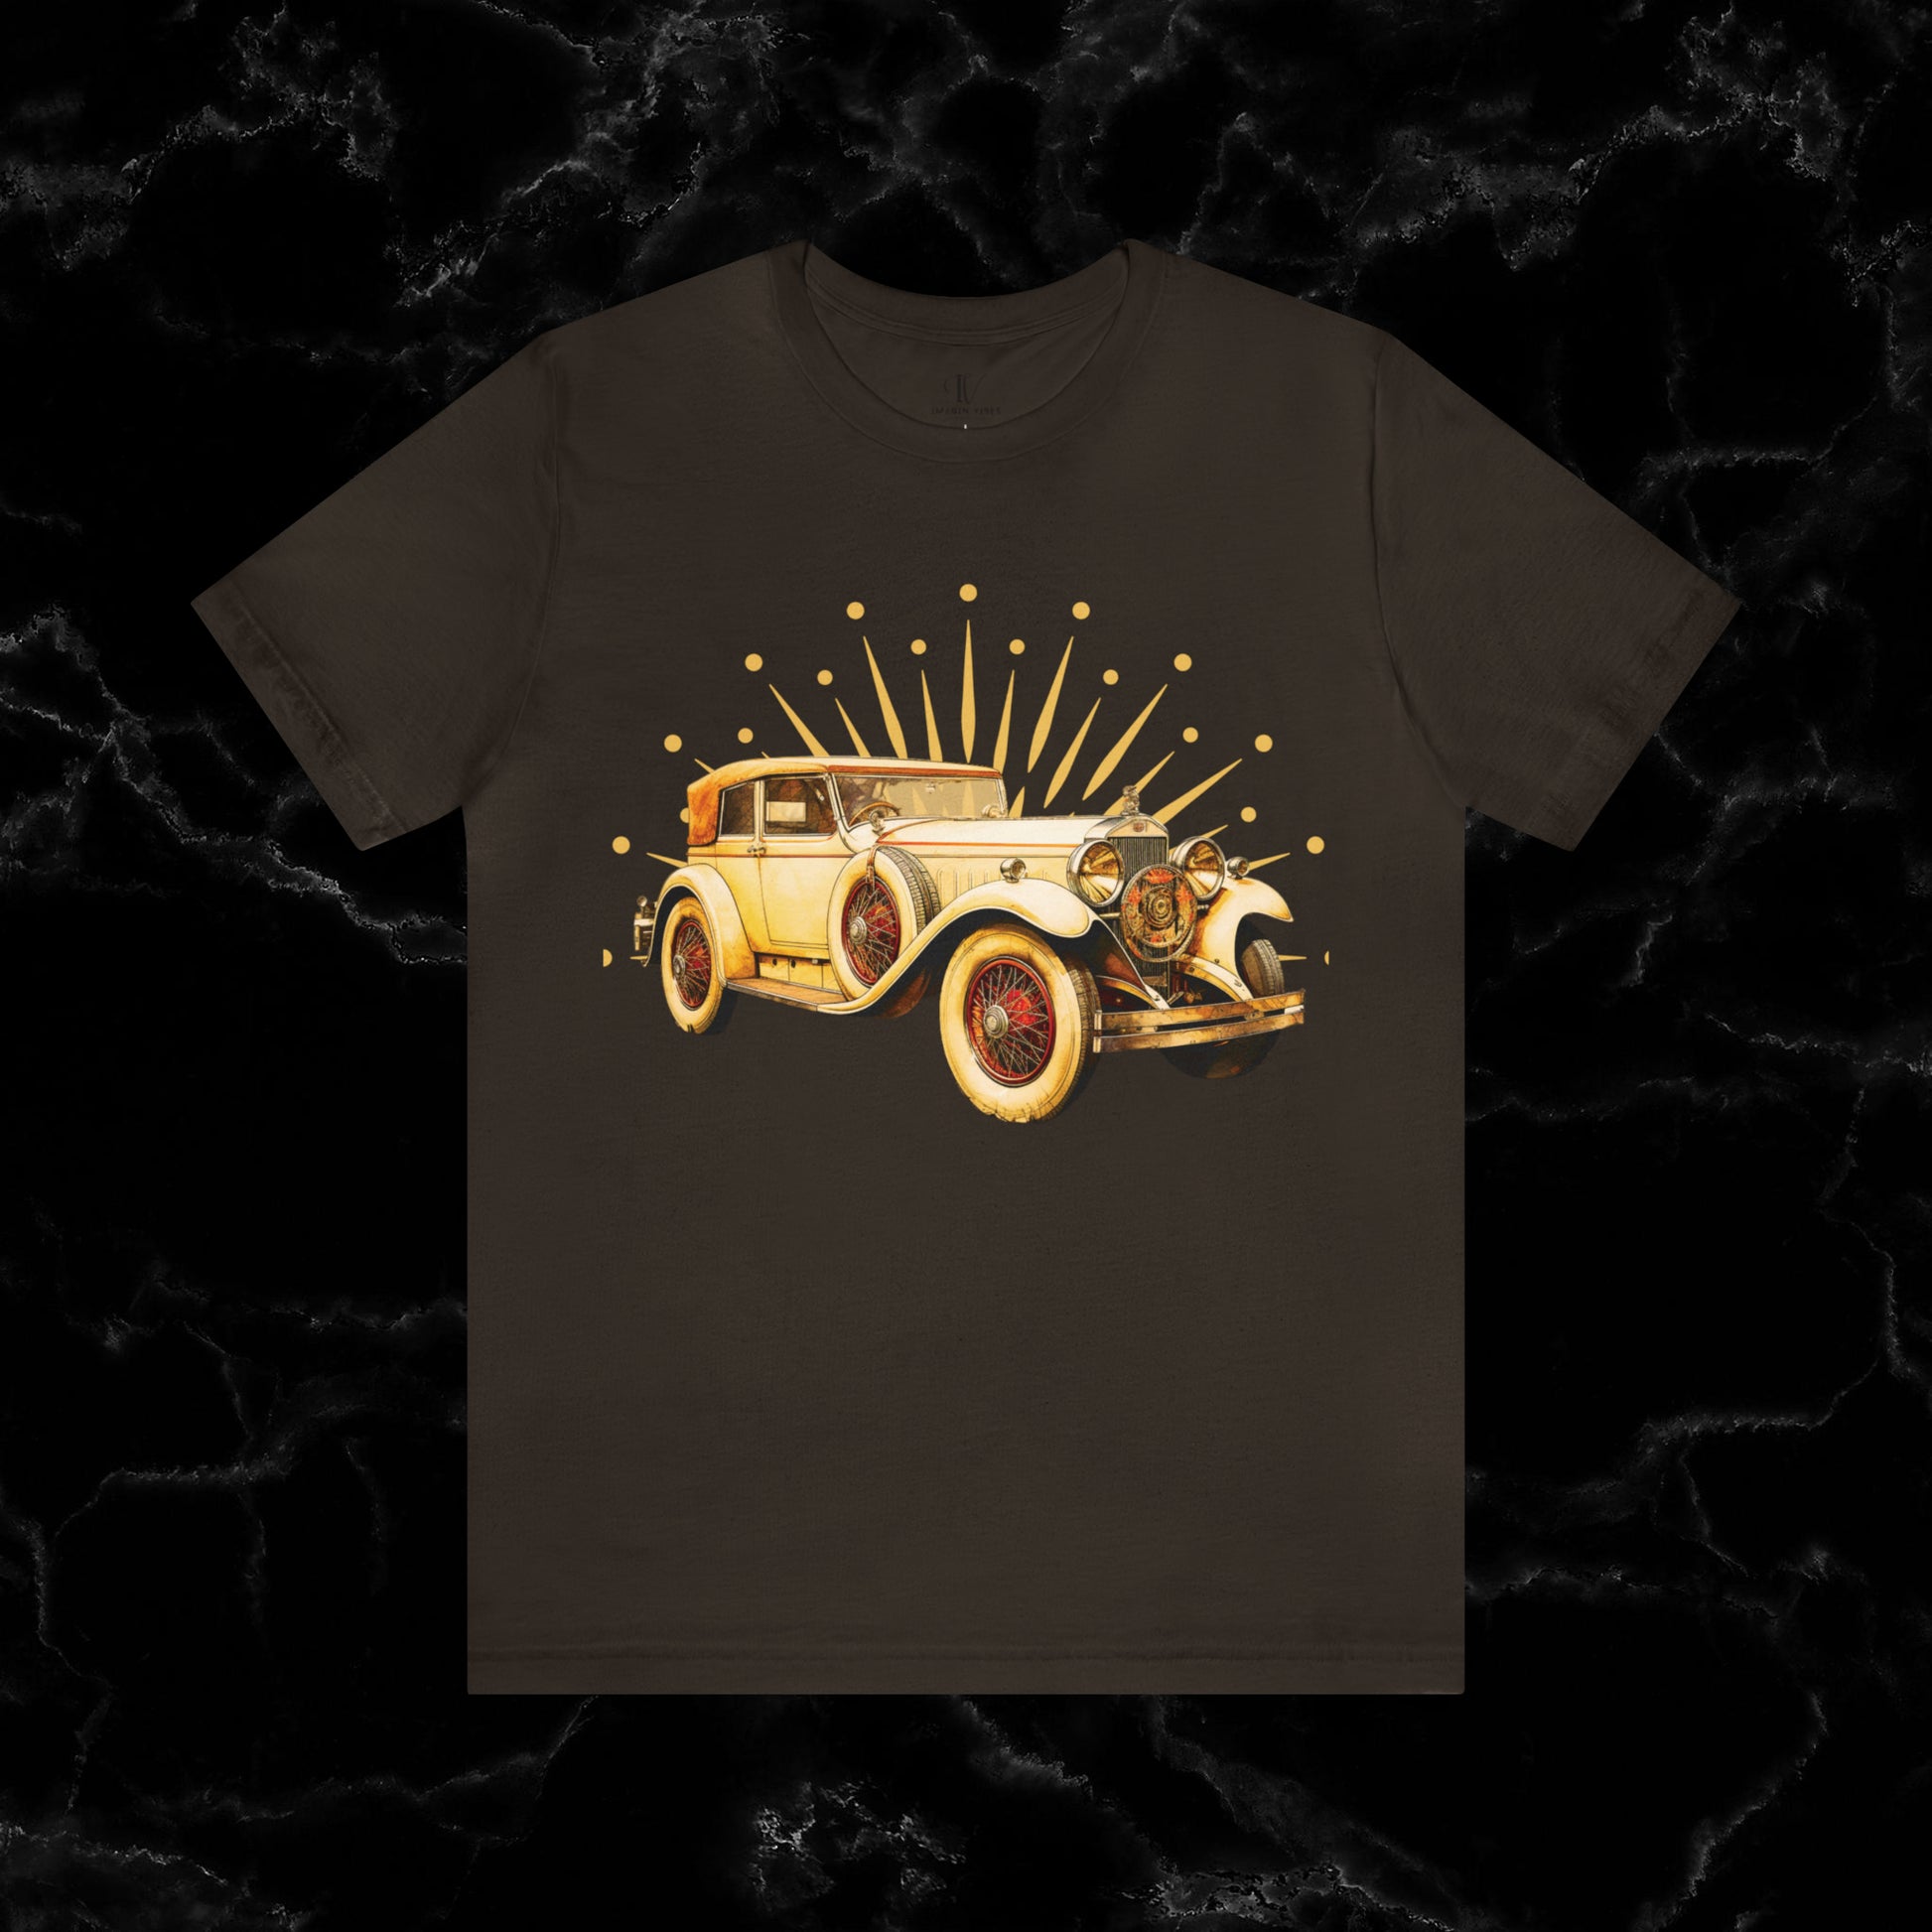 Vintage Car Enthusiast T-Shirt with Classic Wheels and Timeless Appeal T-Shirt Brown S 